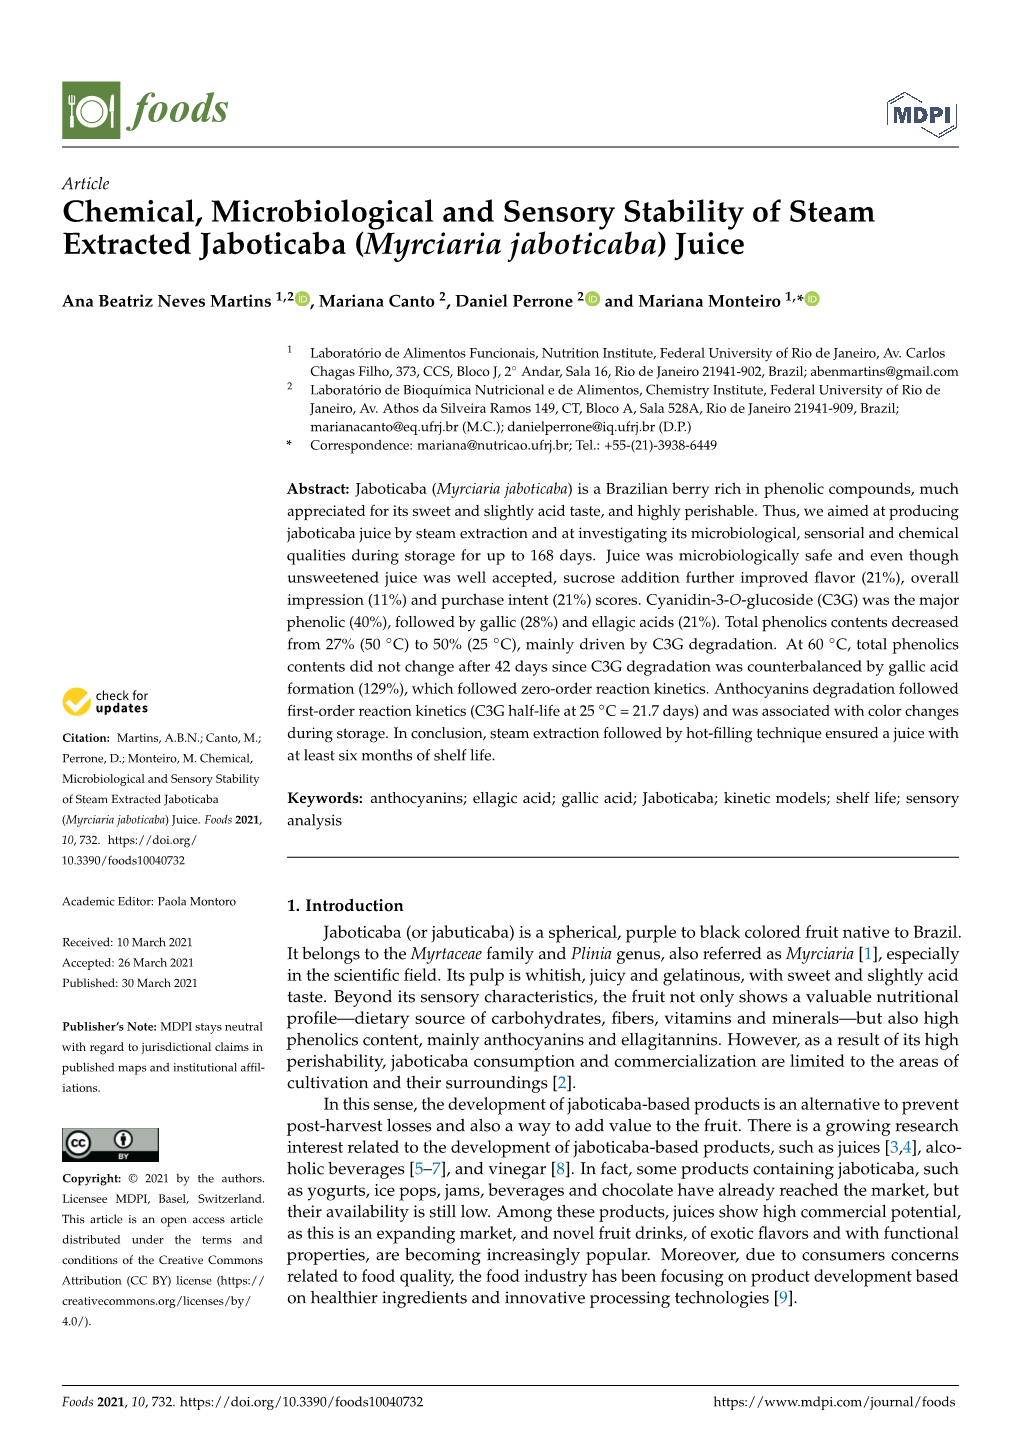 Chemical, Microbiological and Sensory Stability of Steam Extracted Jaboticaba (Myrciaria Jaboticaba) Juice